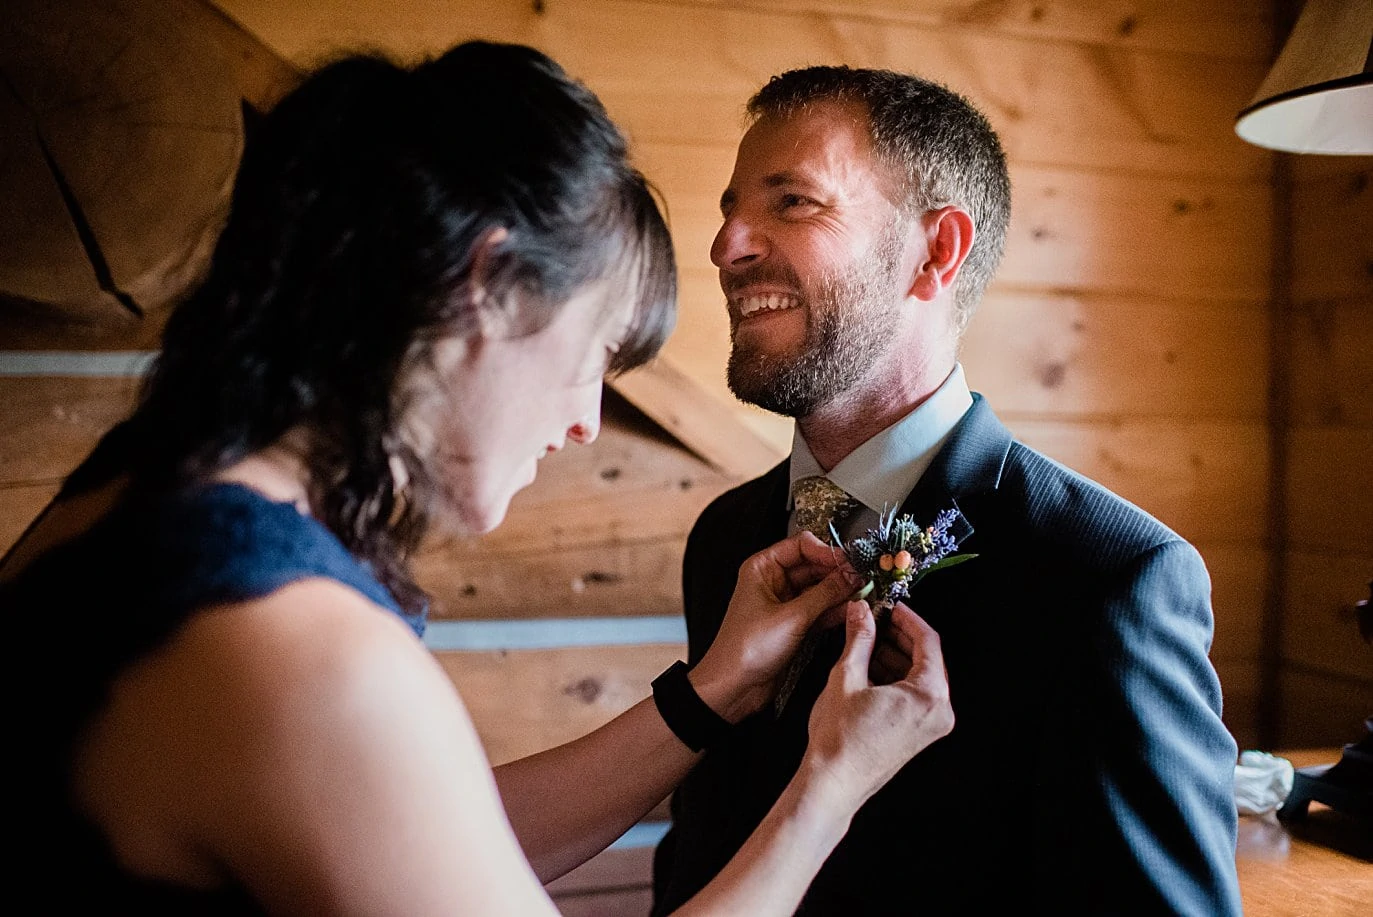 groom getting boutonniere pined on before wedding ceremony at intimate Grand Lake wedding by Grand Lake wedding photographer Jennie Crate